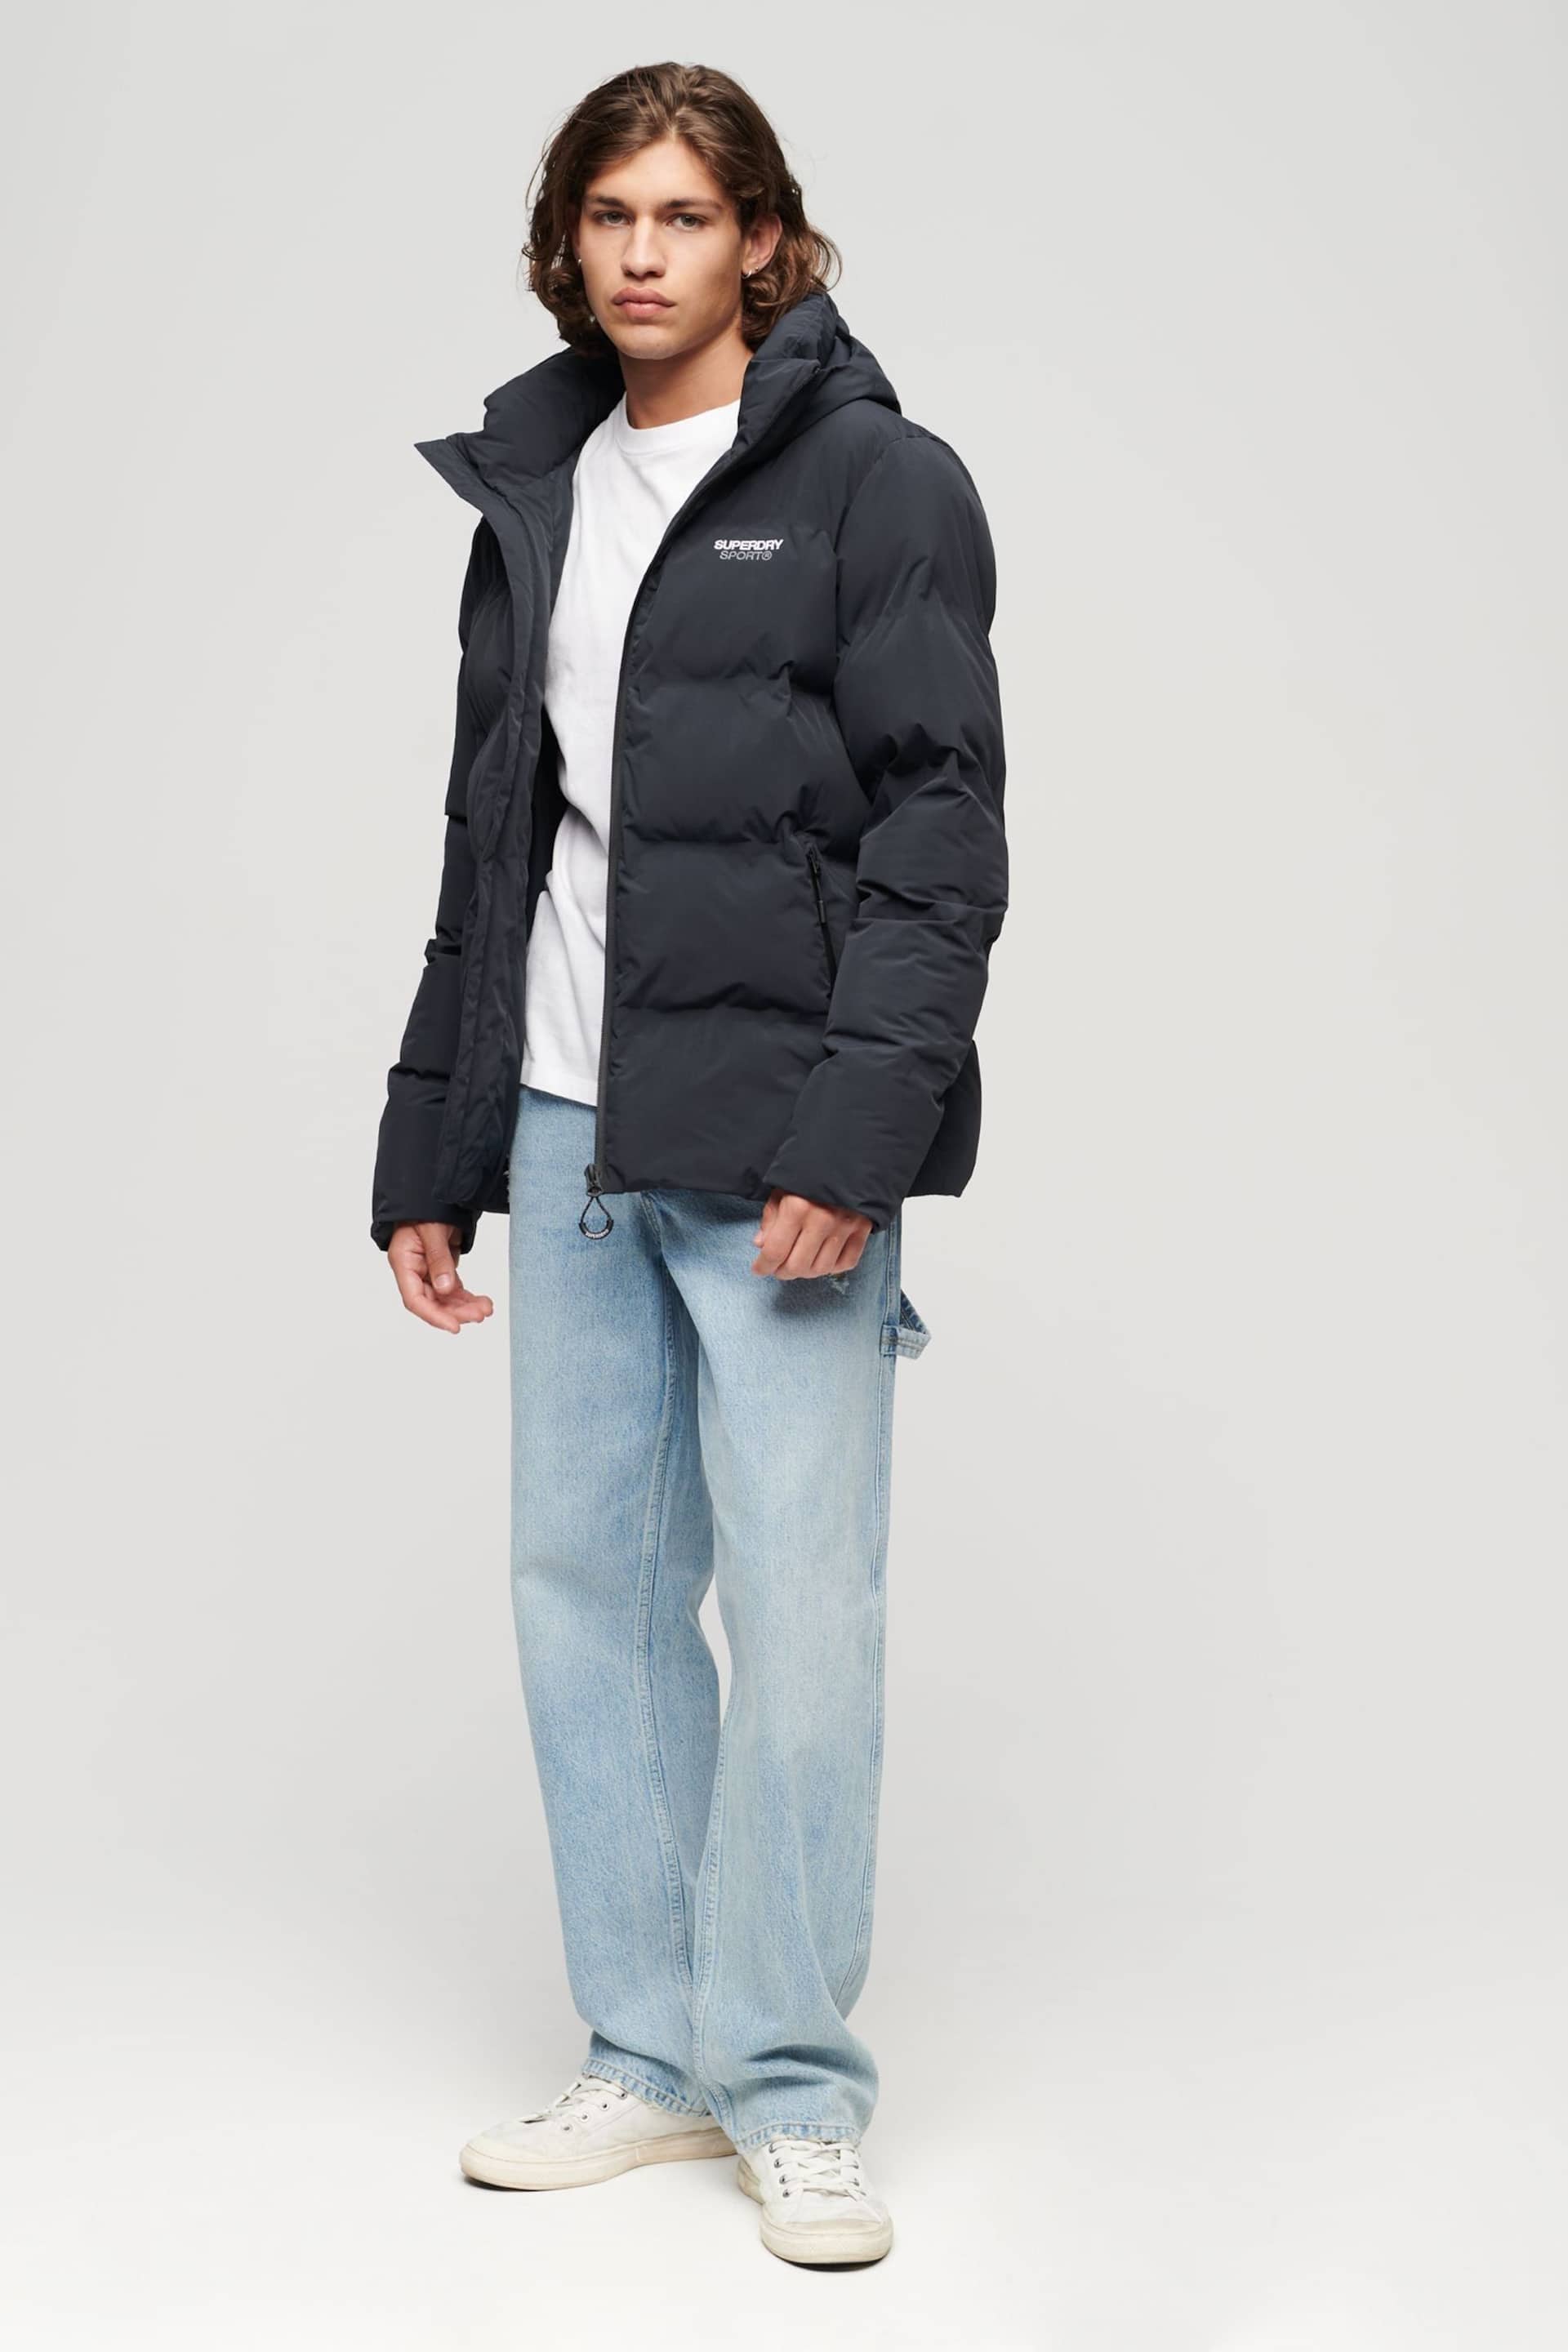 Superdry Blue Hooded Boxy Puffer Jacket - Image 3 of 3